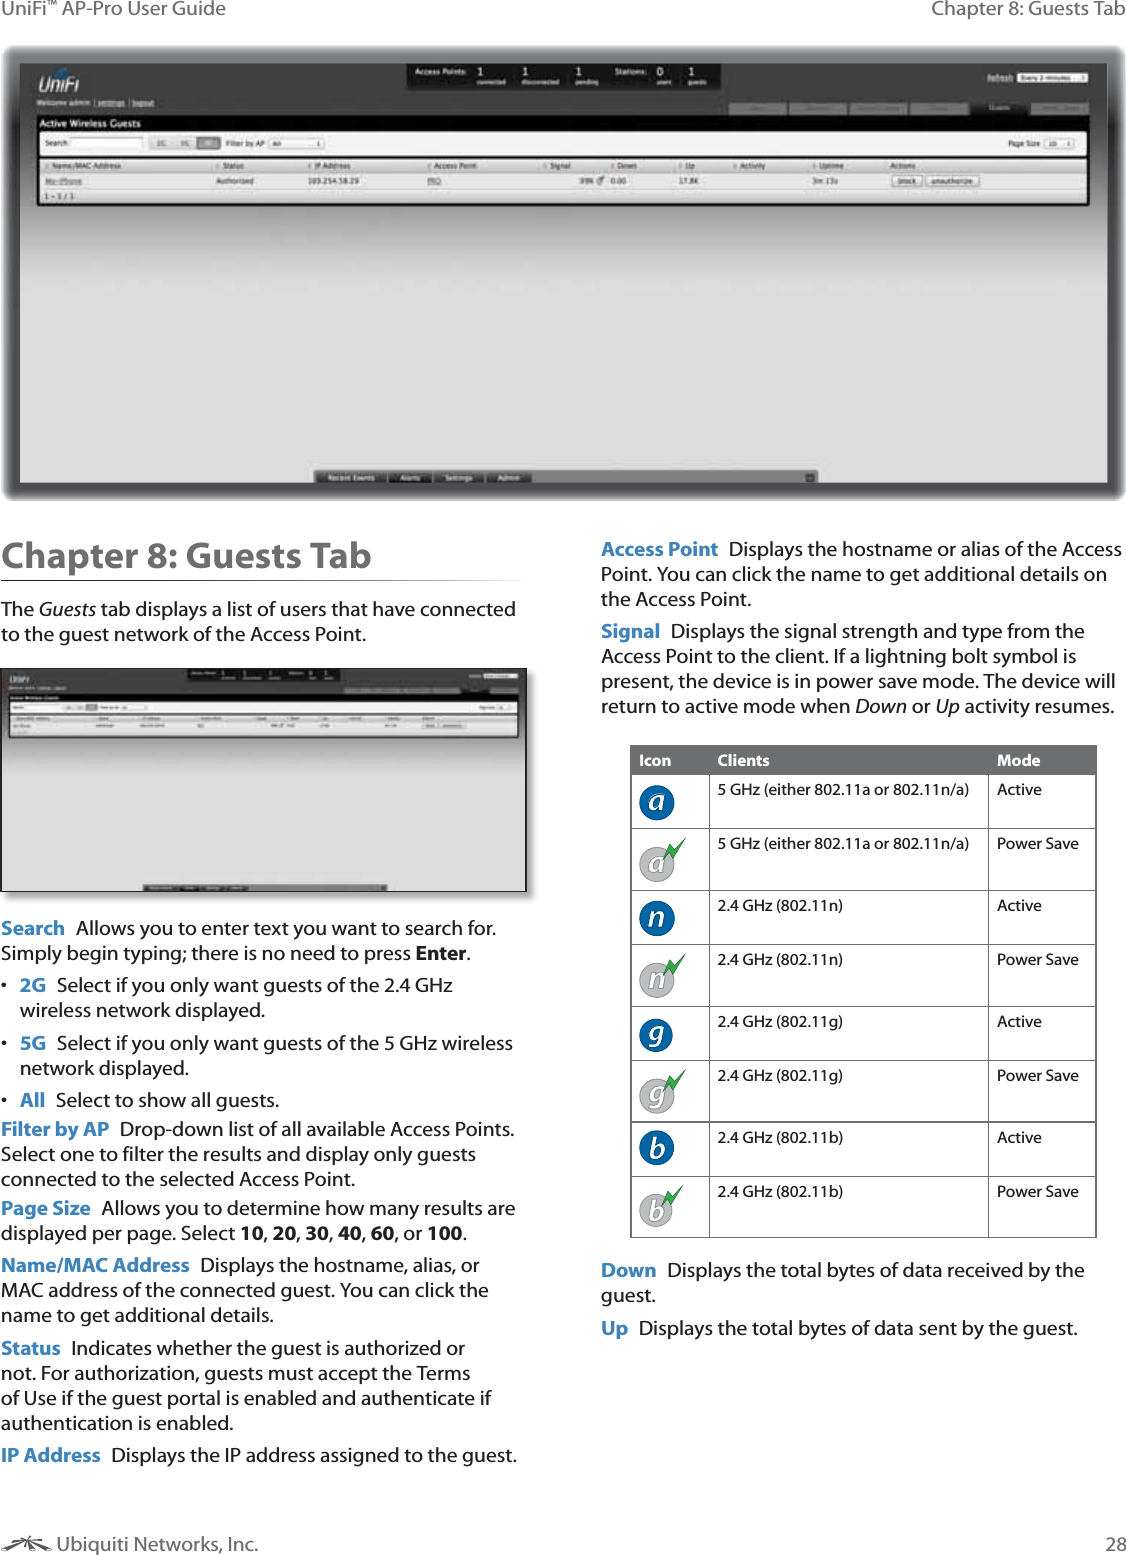 28Chapter 8: Guests TabUniFi™ AP-Pro User Guide Ubiquiti Networks, Inc.Chapter 8: Guests TabThe Guests tab displays a list of users that have connected to the guest network of the Access Point.  Search  Allows you to enter text you want to search for. Simply begin typing; there is no need to press Enter. 2G Select if you only want guests of the 2.4 GHz wireless network displayed. 5G  Select if you only want guests of the 5 GHz wireless network displayed. All  Select to show all guests.Filter by AP  Drop-down list of all available Access Points. Select one to filter the results and display only guests connected to the selected Access Point.Page Size  Allows you to determine how many results are displayed per page. Select 10, 20, 30, 40, 60, or 100. Name/MAC Address  Displays the hostname, alias, or MAC address of the connected guest. You can click the name to get additional details.Status  Indicates whether the guest is authorized or not. For authorization, guests must accept the Terms of Use if the guest portal is enabled and authenticate if authentication is enabled.  IP Address  Displays the IP address assigned to the guest.Access Point  Displays the hostname or alias of the Access Point. You can click the name to get additional details on the Access Point.Signal  Displays the signal strength and type from the Access Point to the client. If a lightning bolt symbol is present, the device is in power save mode. The device will return to active mode when Down or Up activity resumes.Icon Clients Modea5 GHz (either 802.11a or 802.11n/a) Activea5 GHz (either 802.11a or 802.11n/a) Power Saven2.4 GHz (802.11n) Activen2.4 GHz (802.11n) Power Saveg2.4 GHz (802.11g) Activeg2.4 GHz (802.11g) Power Saveb2.4 GHz (802.11b) Activeb2.4 GHz (802.11b) Power SaveDown  Displays the total bytes of data received by the guest.Up  Displays the total bytes of data sent by the guest.